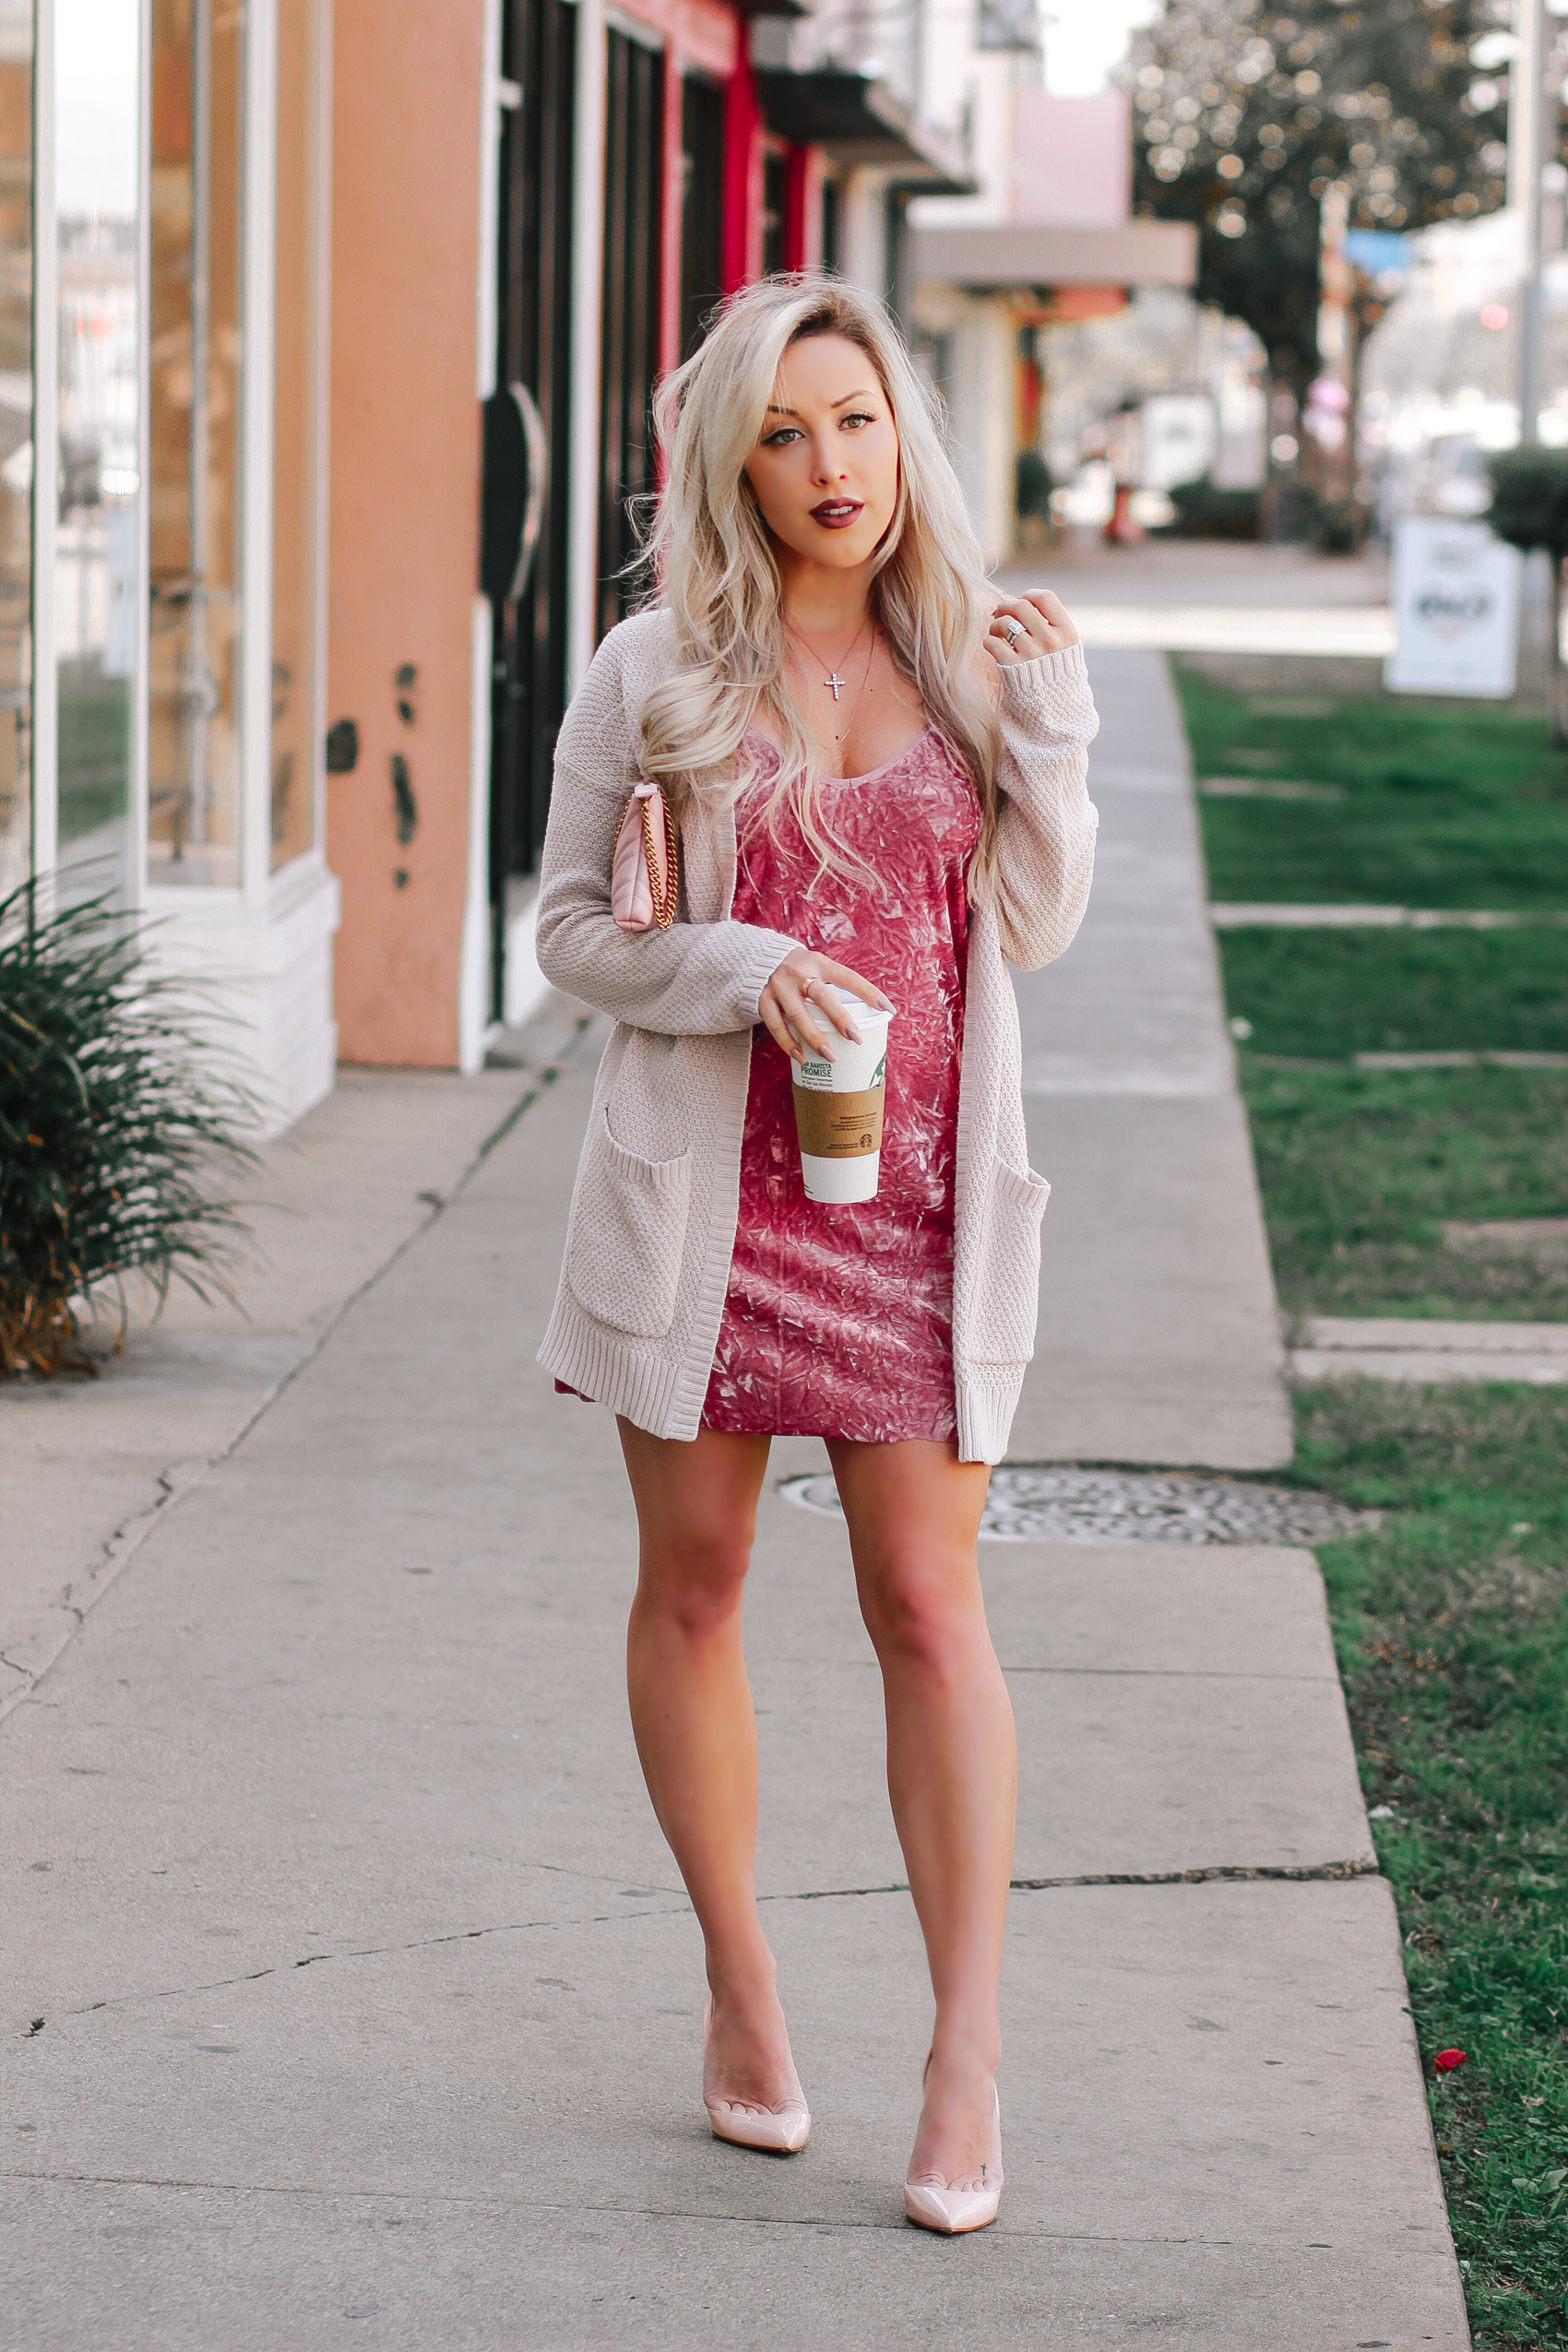 Pink Crushed Velvet Dress, Blush Pink Gucci Crossbody, Pink Louboutins | Valentine's Day inspired Outfit | Blondie in the City by Hayley Larue